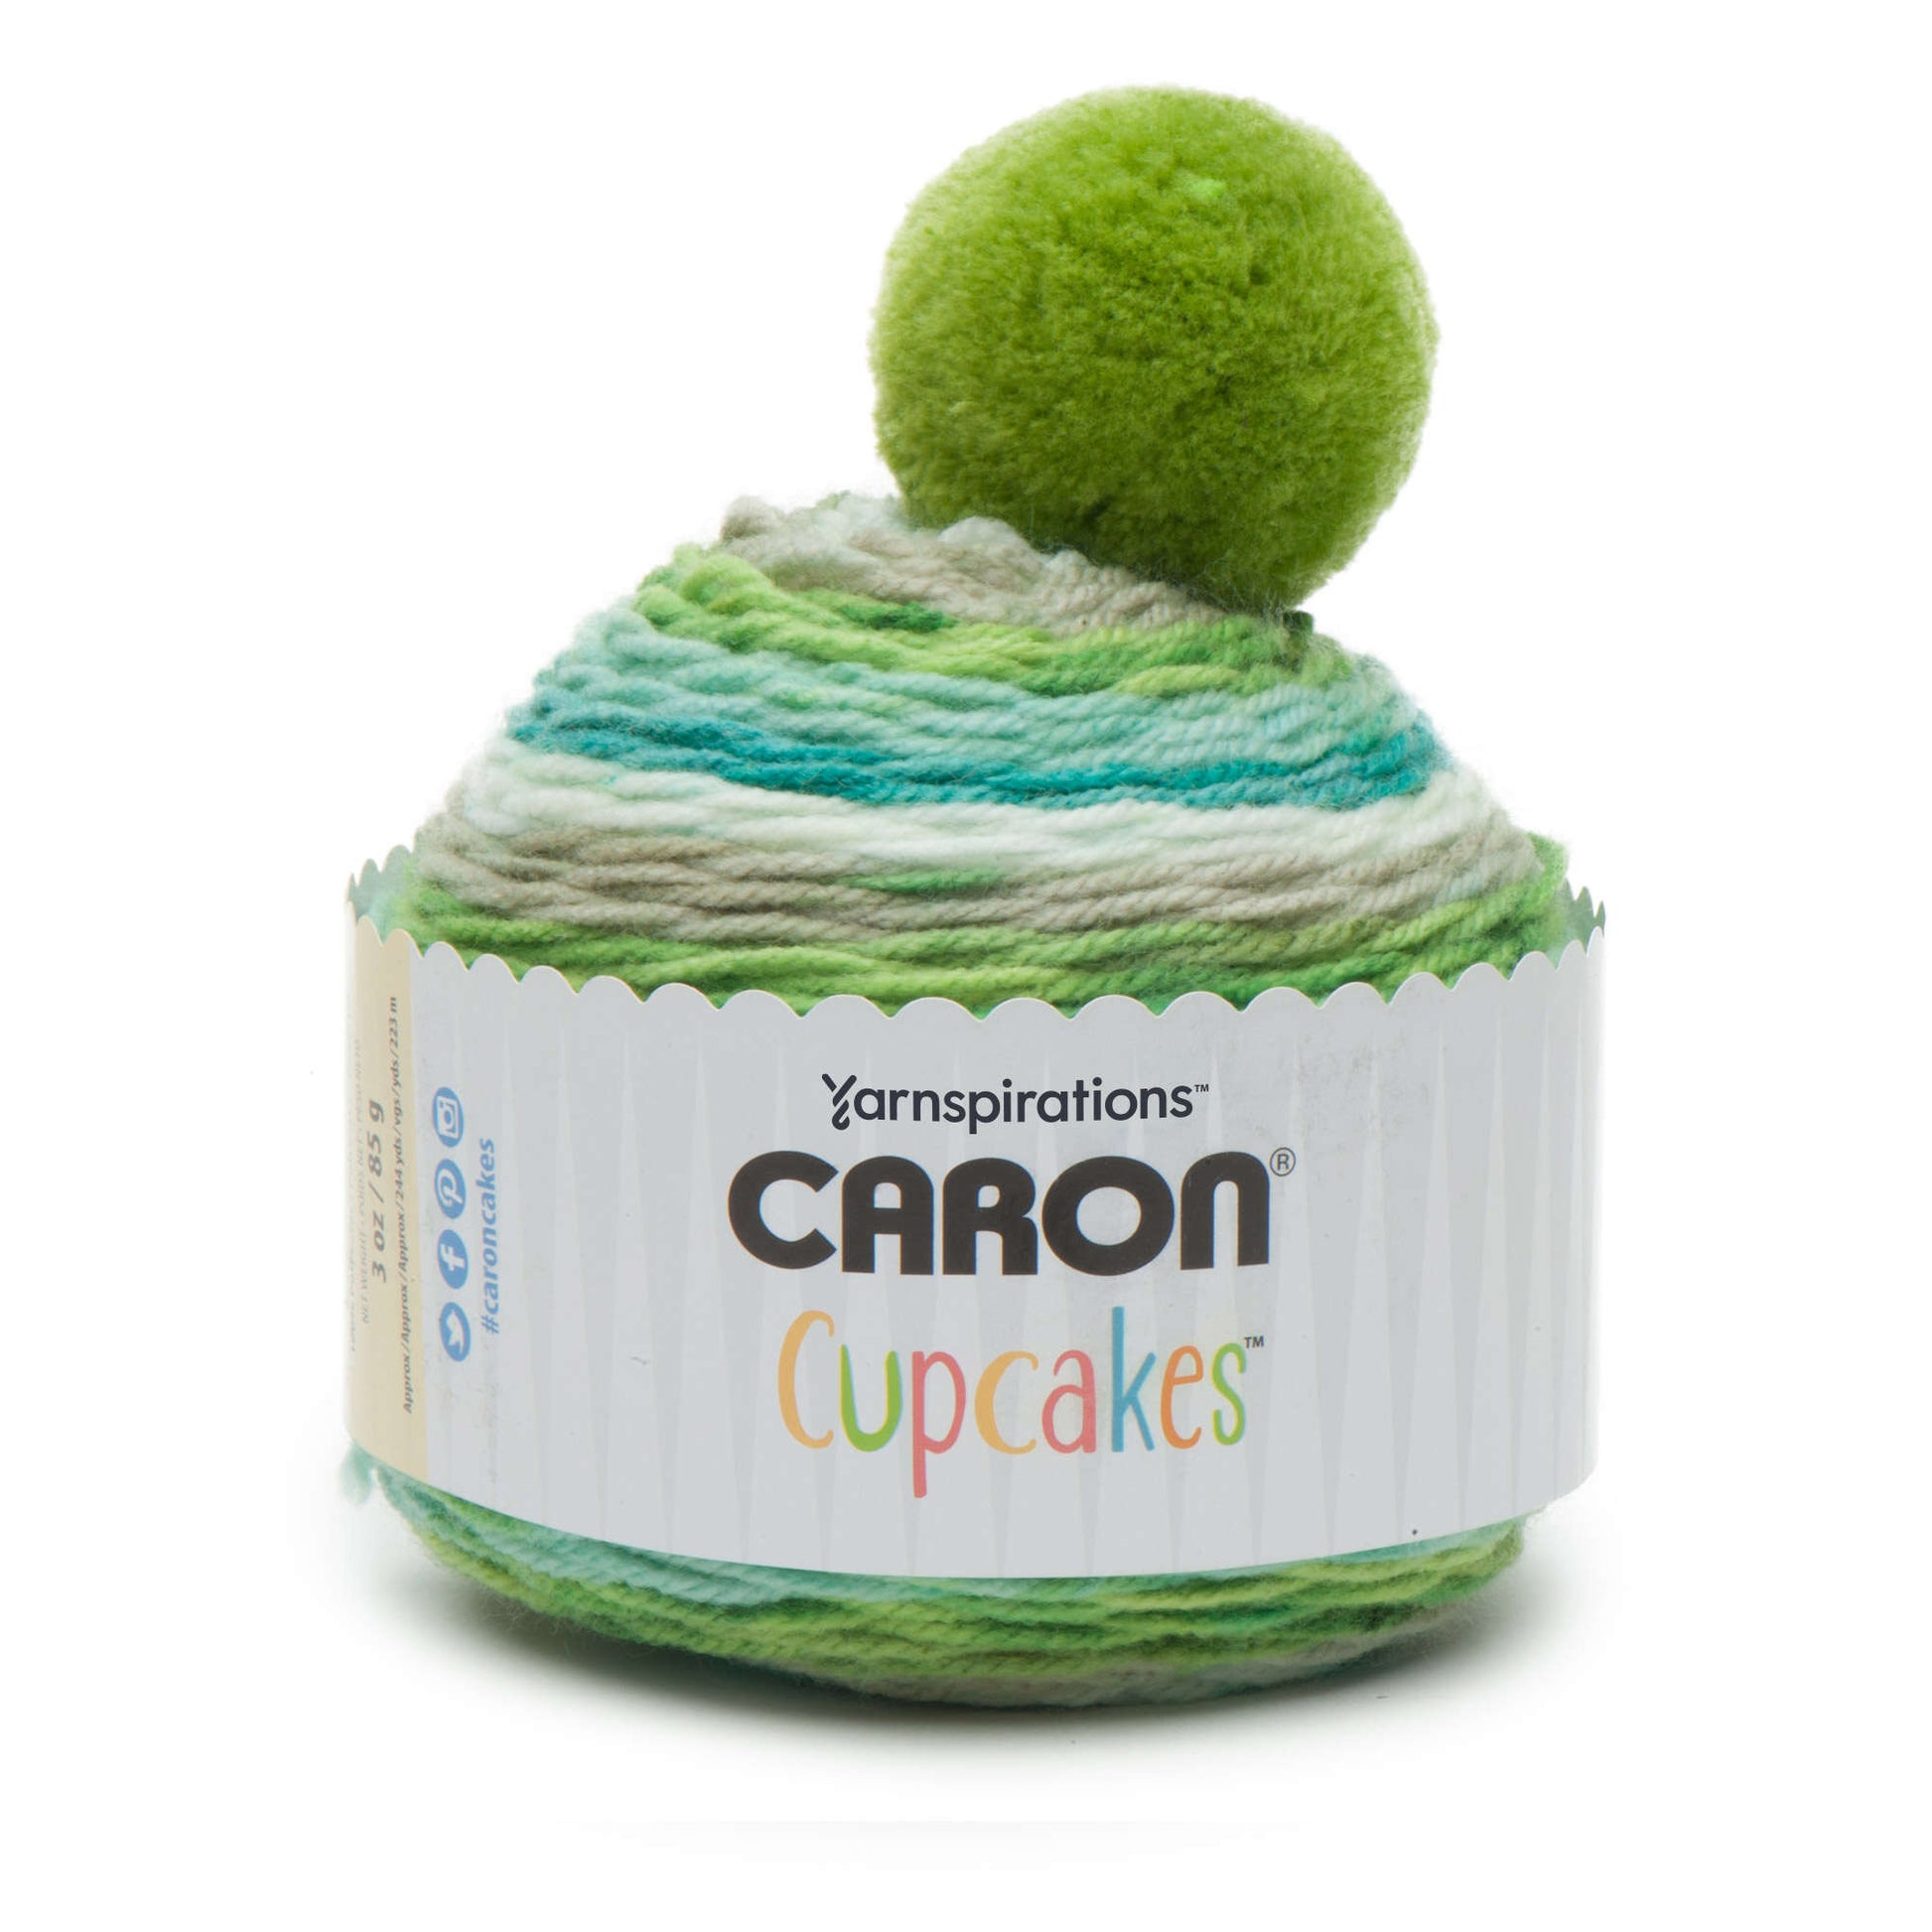 Caron Cupcakes Yarn - Discontinued Shades Mint Smoothie